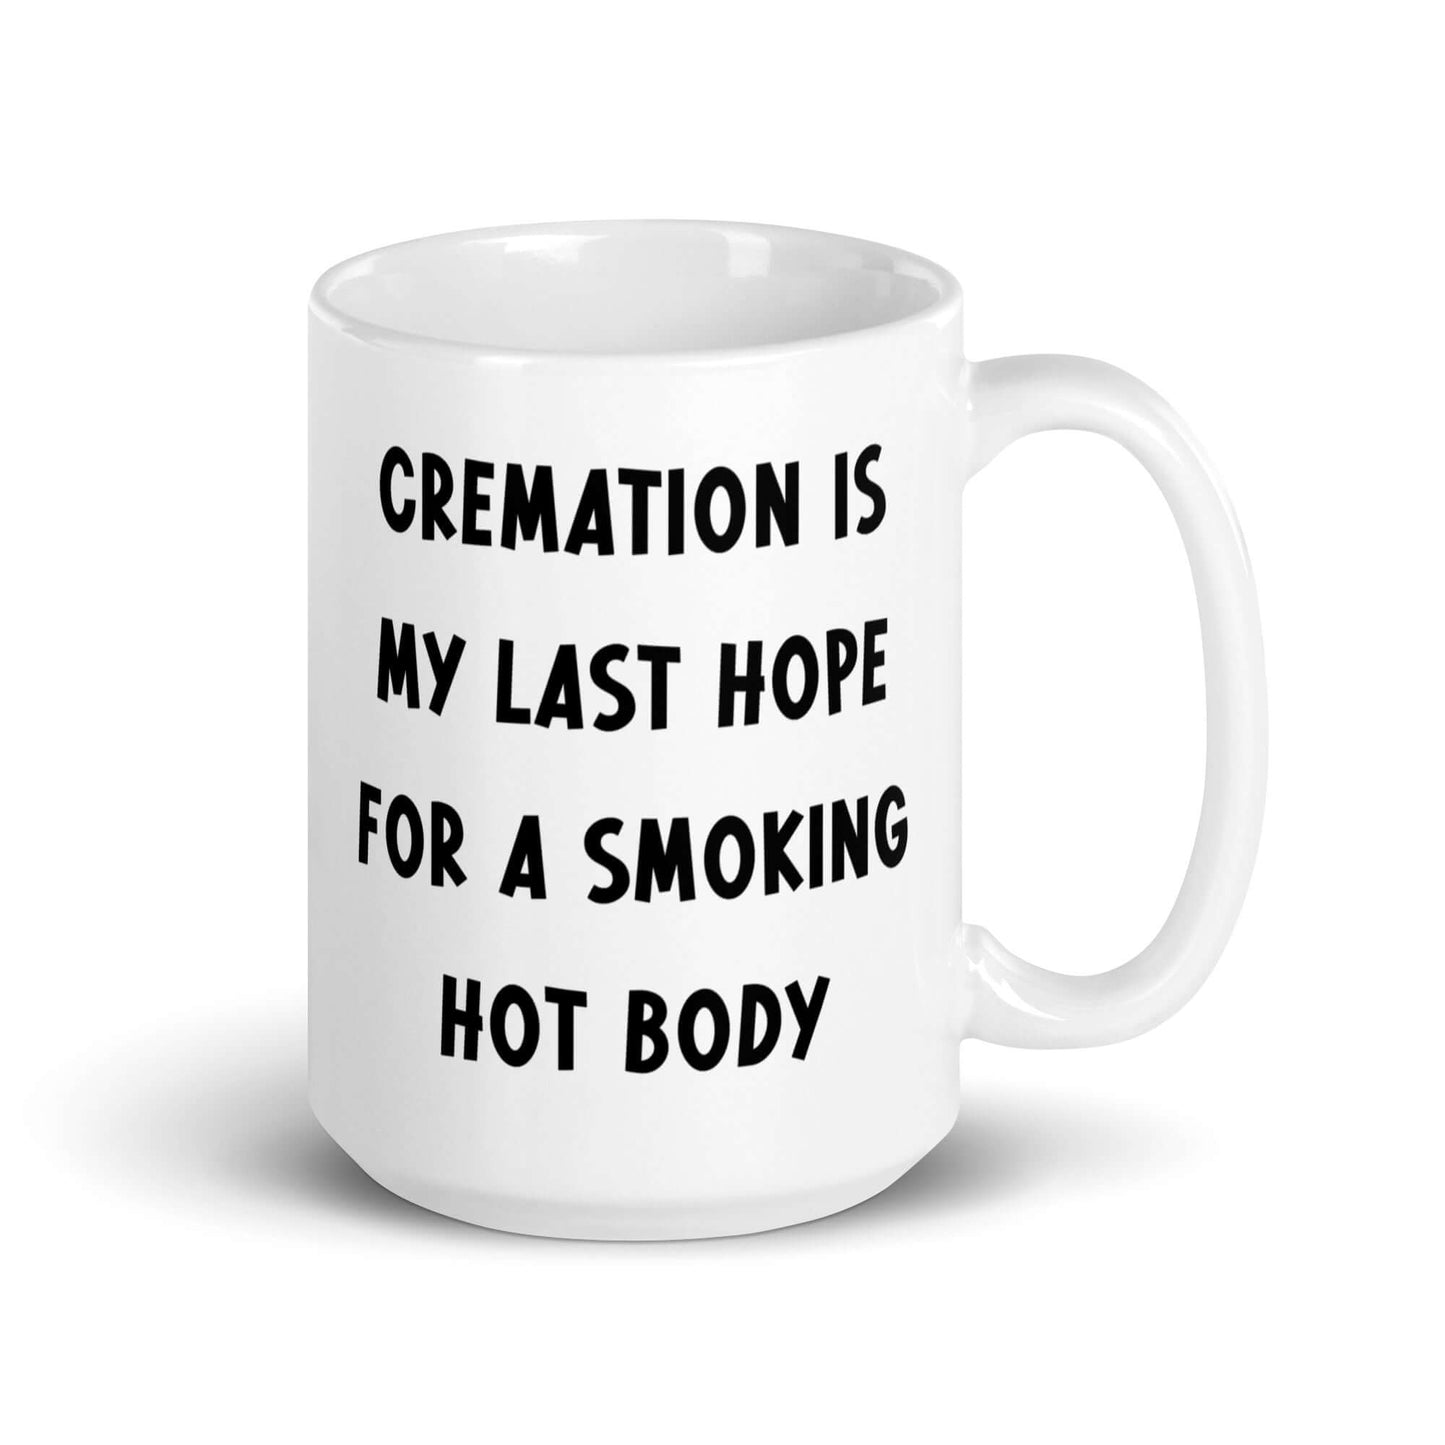 White ceramic mug with the words Cremation is my last hope for a smoking hot body printed on both sides.